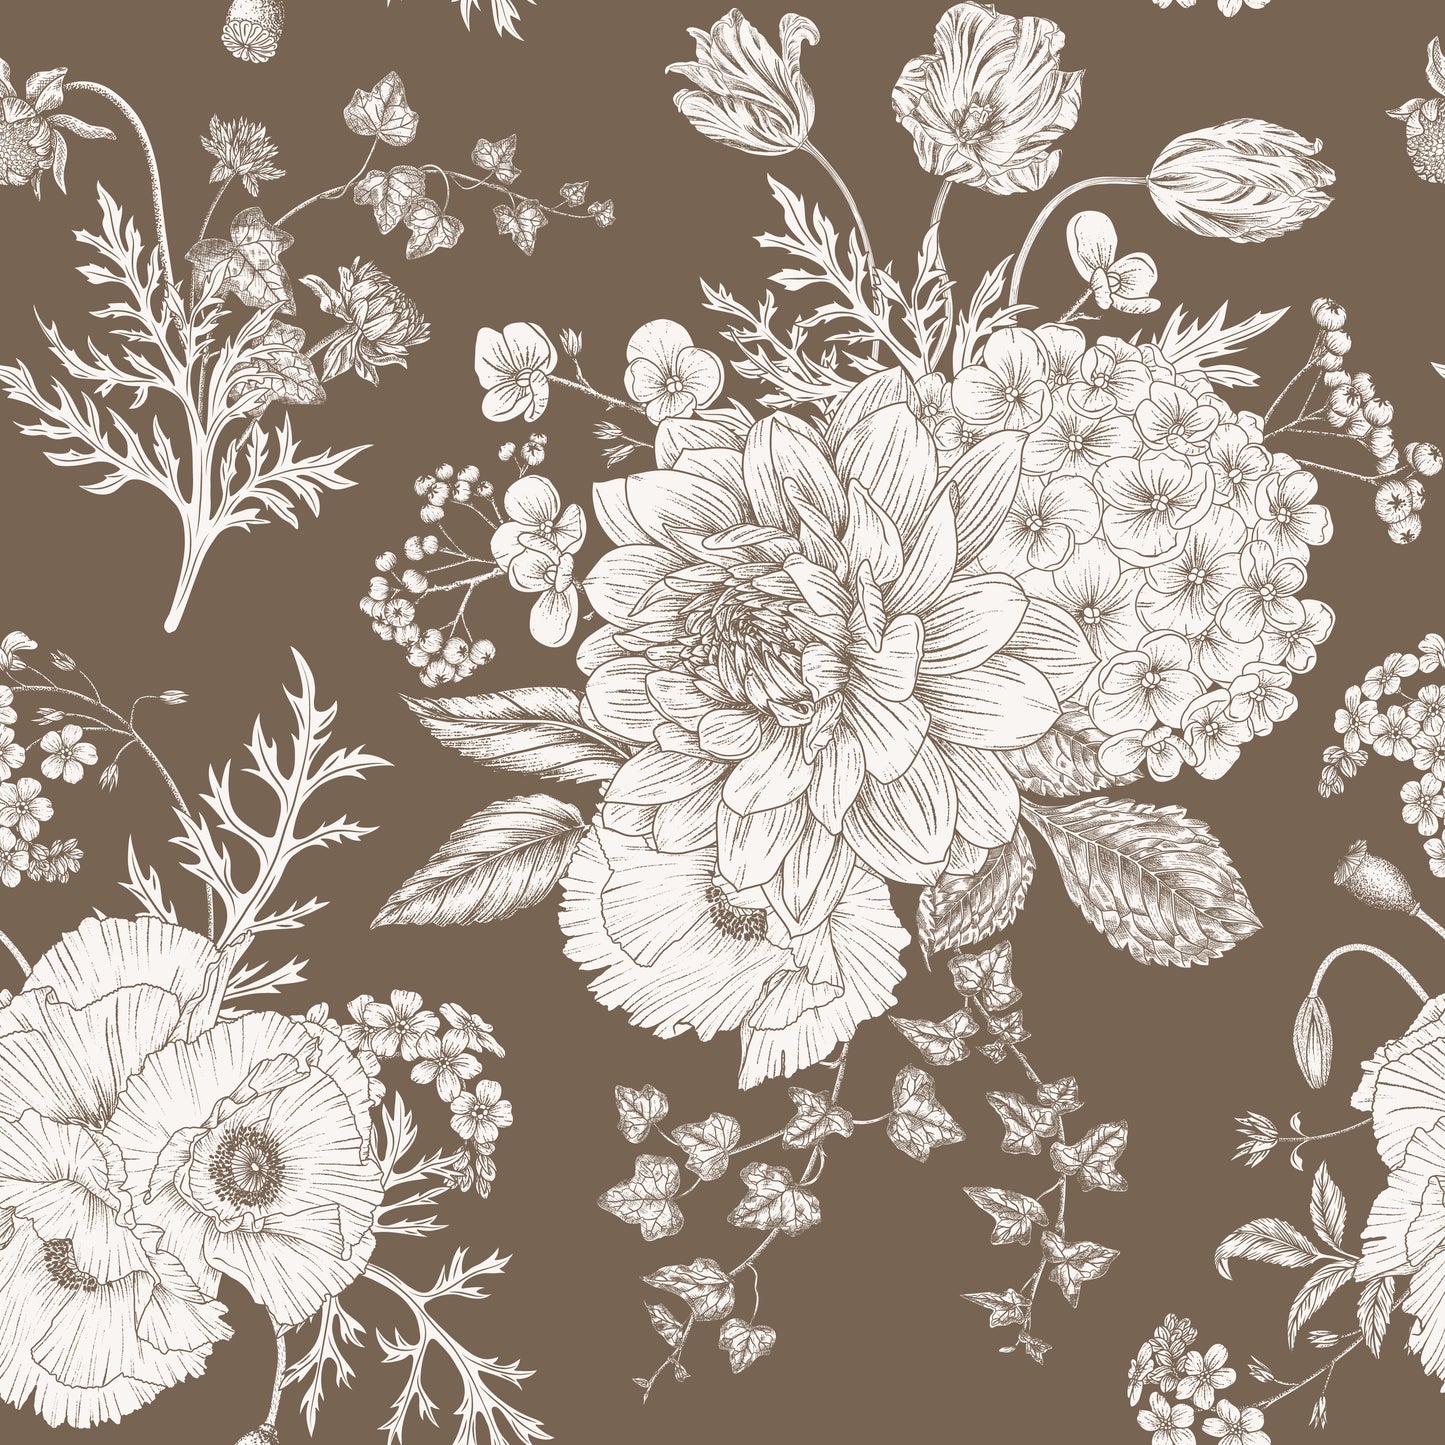 Vintage boho bouquet cream floral bouquet print on brown background easy to install and remove peel and stick custom wallpaper available in different lengths/sizes locally created and printed in Canada wallpaper. Washable, durable, commercial grade, removable and waterproof.